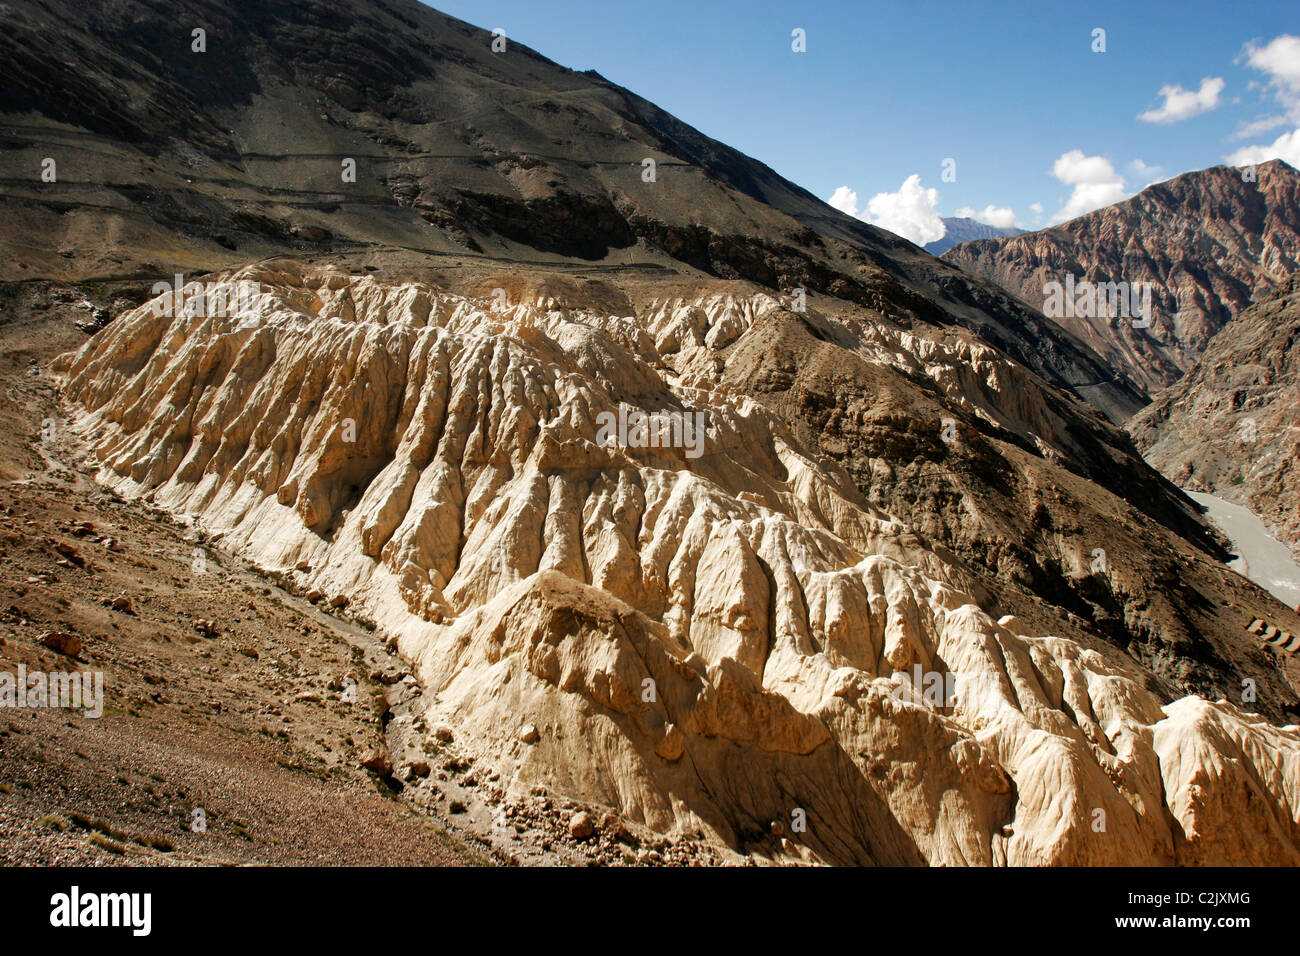 erosion-mountain-top-from-wind-and-water-in-himachal-pradesh-india-C2JXMG.jpg